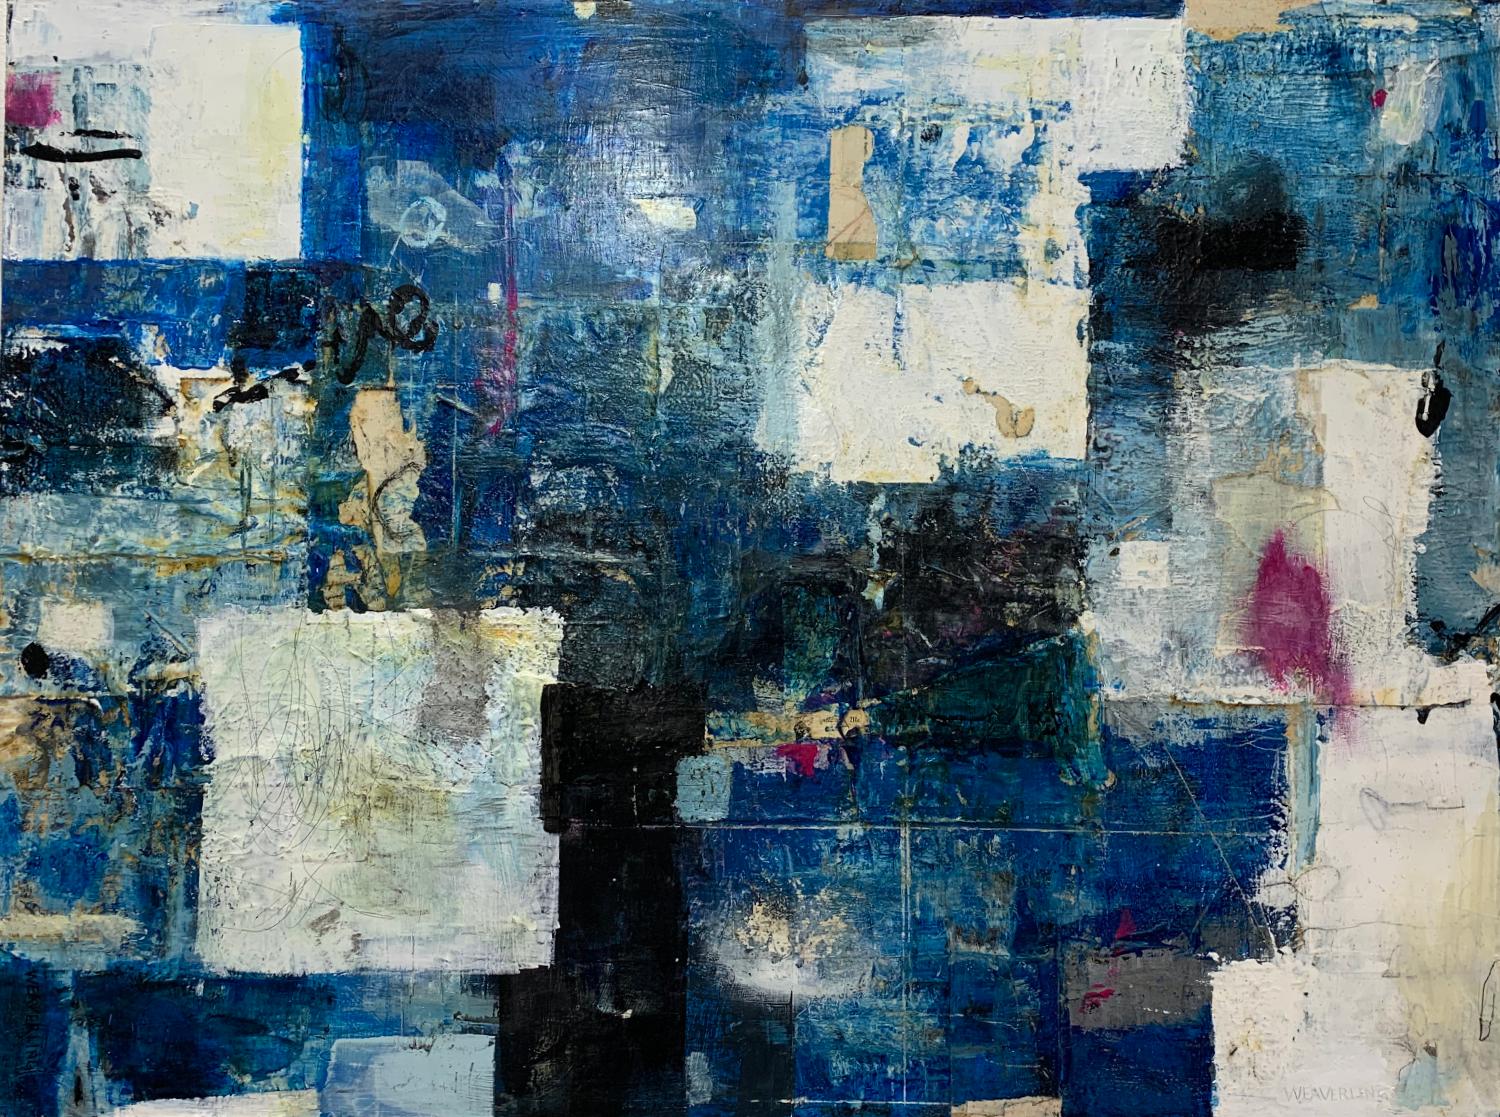 Strength of Community, Abstract Painting - Mixed Media Art by Julie Weaverling